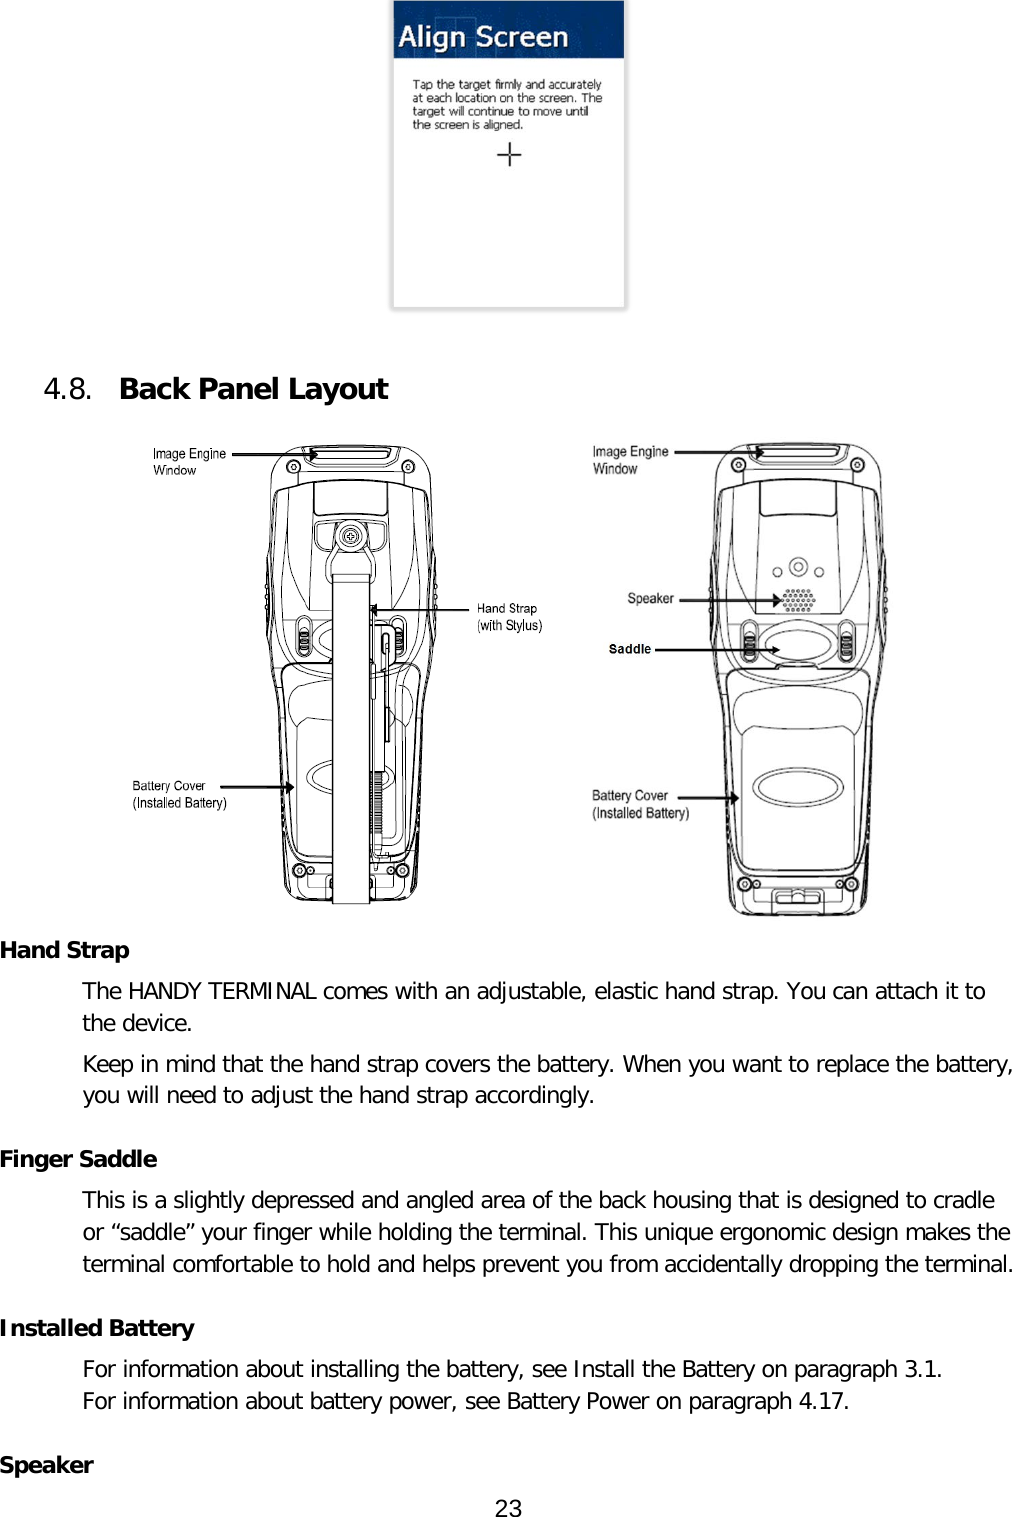    4.8. Back Panel Layout     Hand Strap The HANDY TERMINAL comes with an adjustable, elastic hand strap. You can attach it to the device.  Keep in mind that the hand strap covers the battery. When you want to replace the battery, you will need to adjust the hand strap accordingly.  Finger Saddle This is a slightly depressed and angled area of the back housing that is designed to cradle or “saddle” your finger while holding the terminal. This unique ergonomic design makes the terminal comfortable to hold and helps prevent you from accidentally dropping the terminal.  Installed Battery For information about installing the battery, see Install the Battery on paragraph 3.1.  For information about battery power, see Battery Power on paragraph 4.17.  Speaker 23  